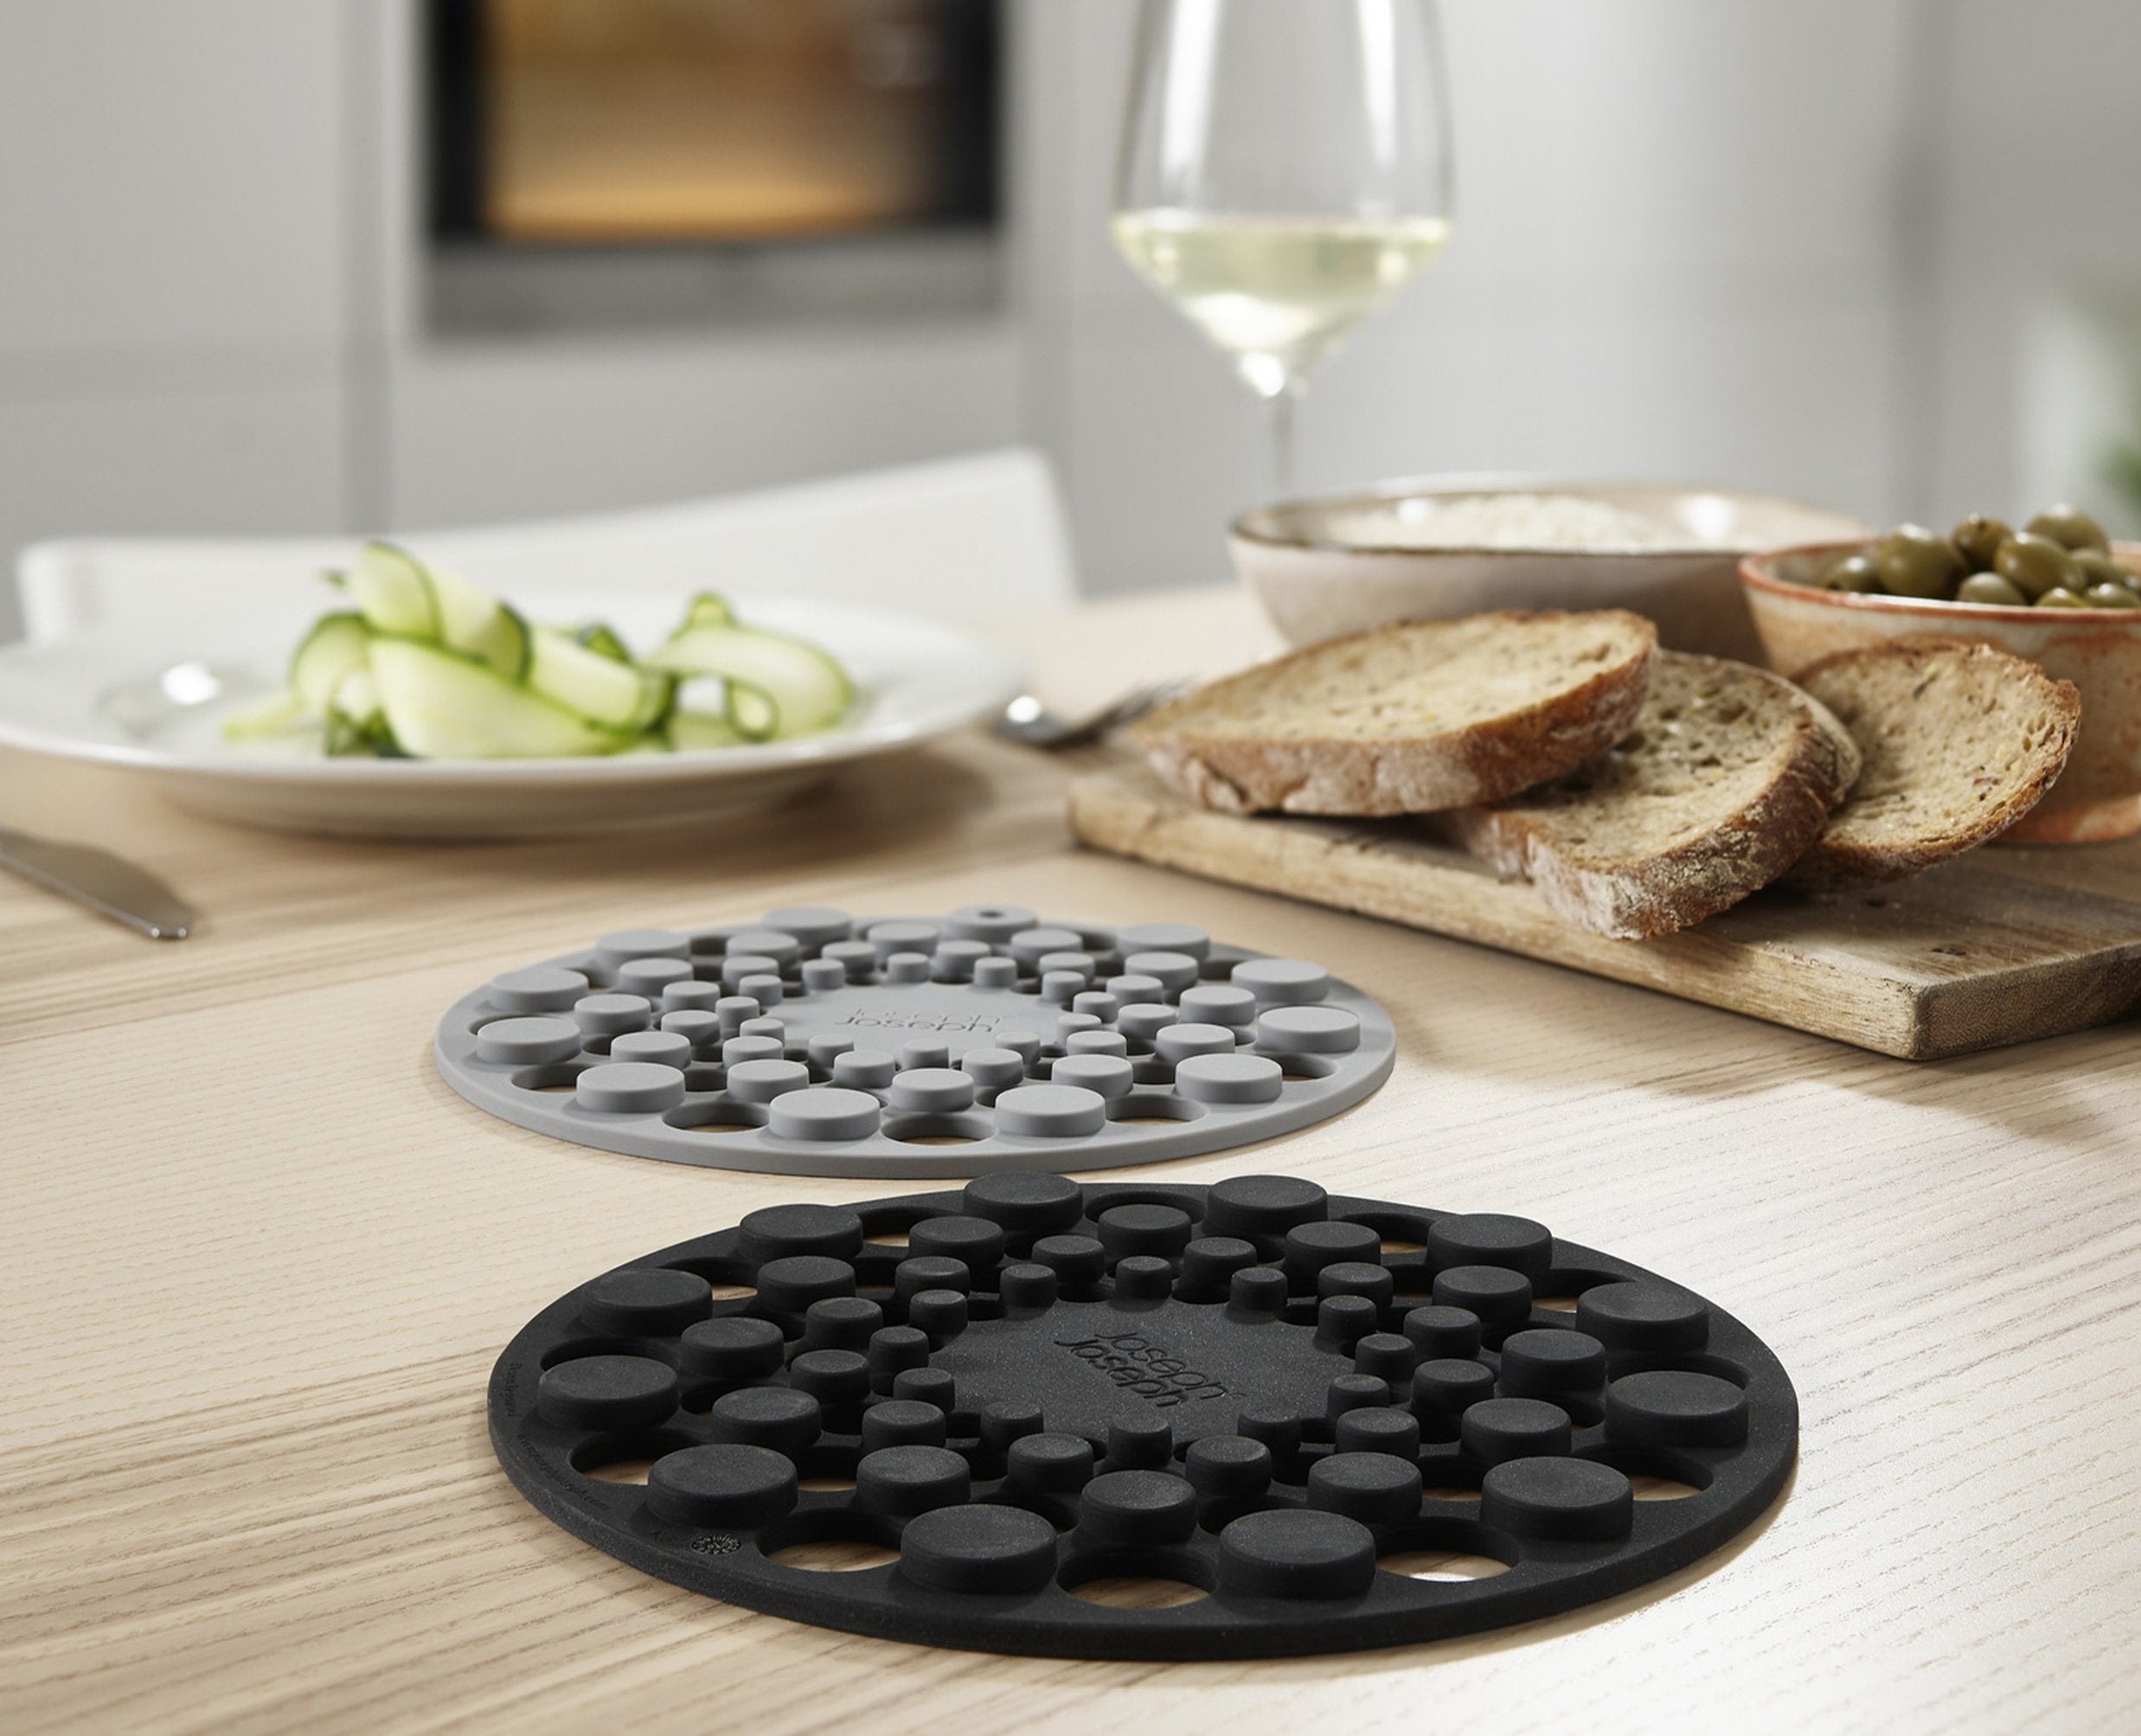 BEON.COM.AU  These two heat and stain-resistant circular trivets fit neatly together for compact storage.  Heat-resistant up to 220˚C (428˚F) Protects surfaces from scratches and heat damage Stain-resistant Store together saving valuable drawer space Easy to clean - dishwasher safe  Specifications  Care &amp... Joseph Joseph at BEON.COM.AU